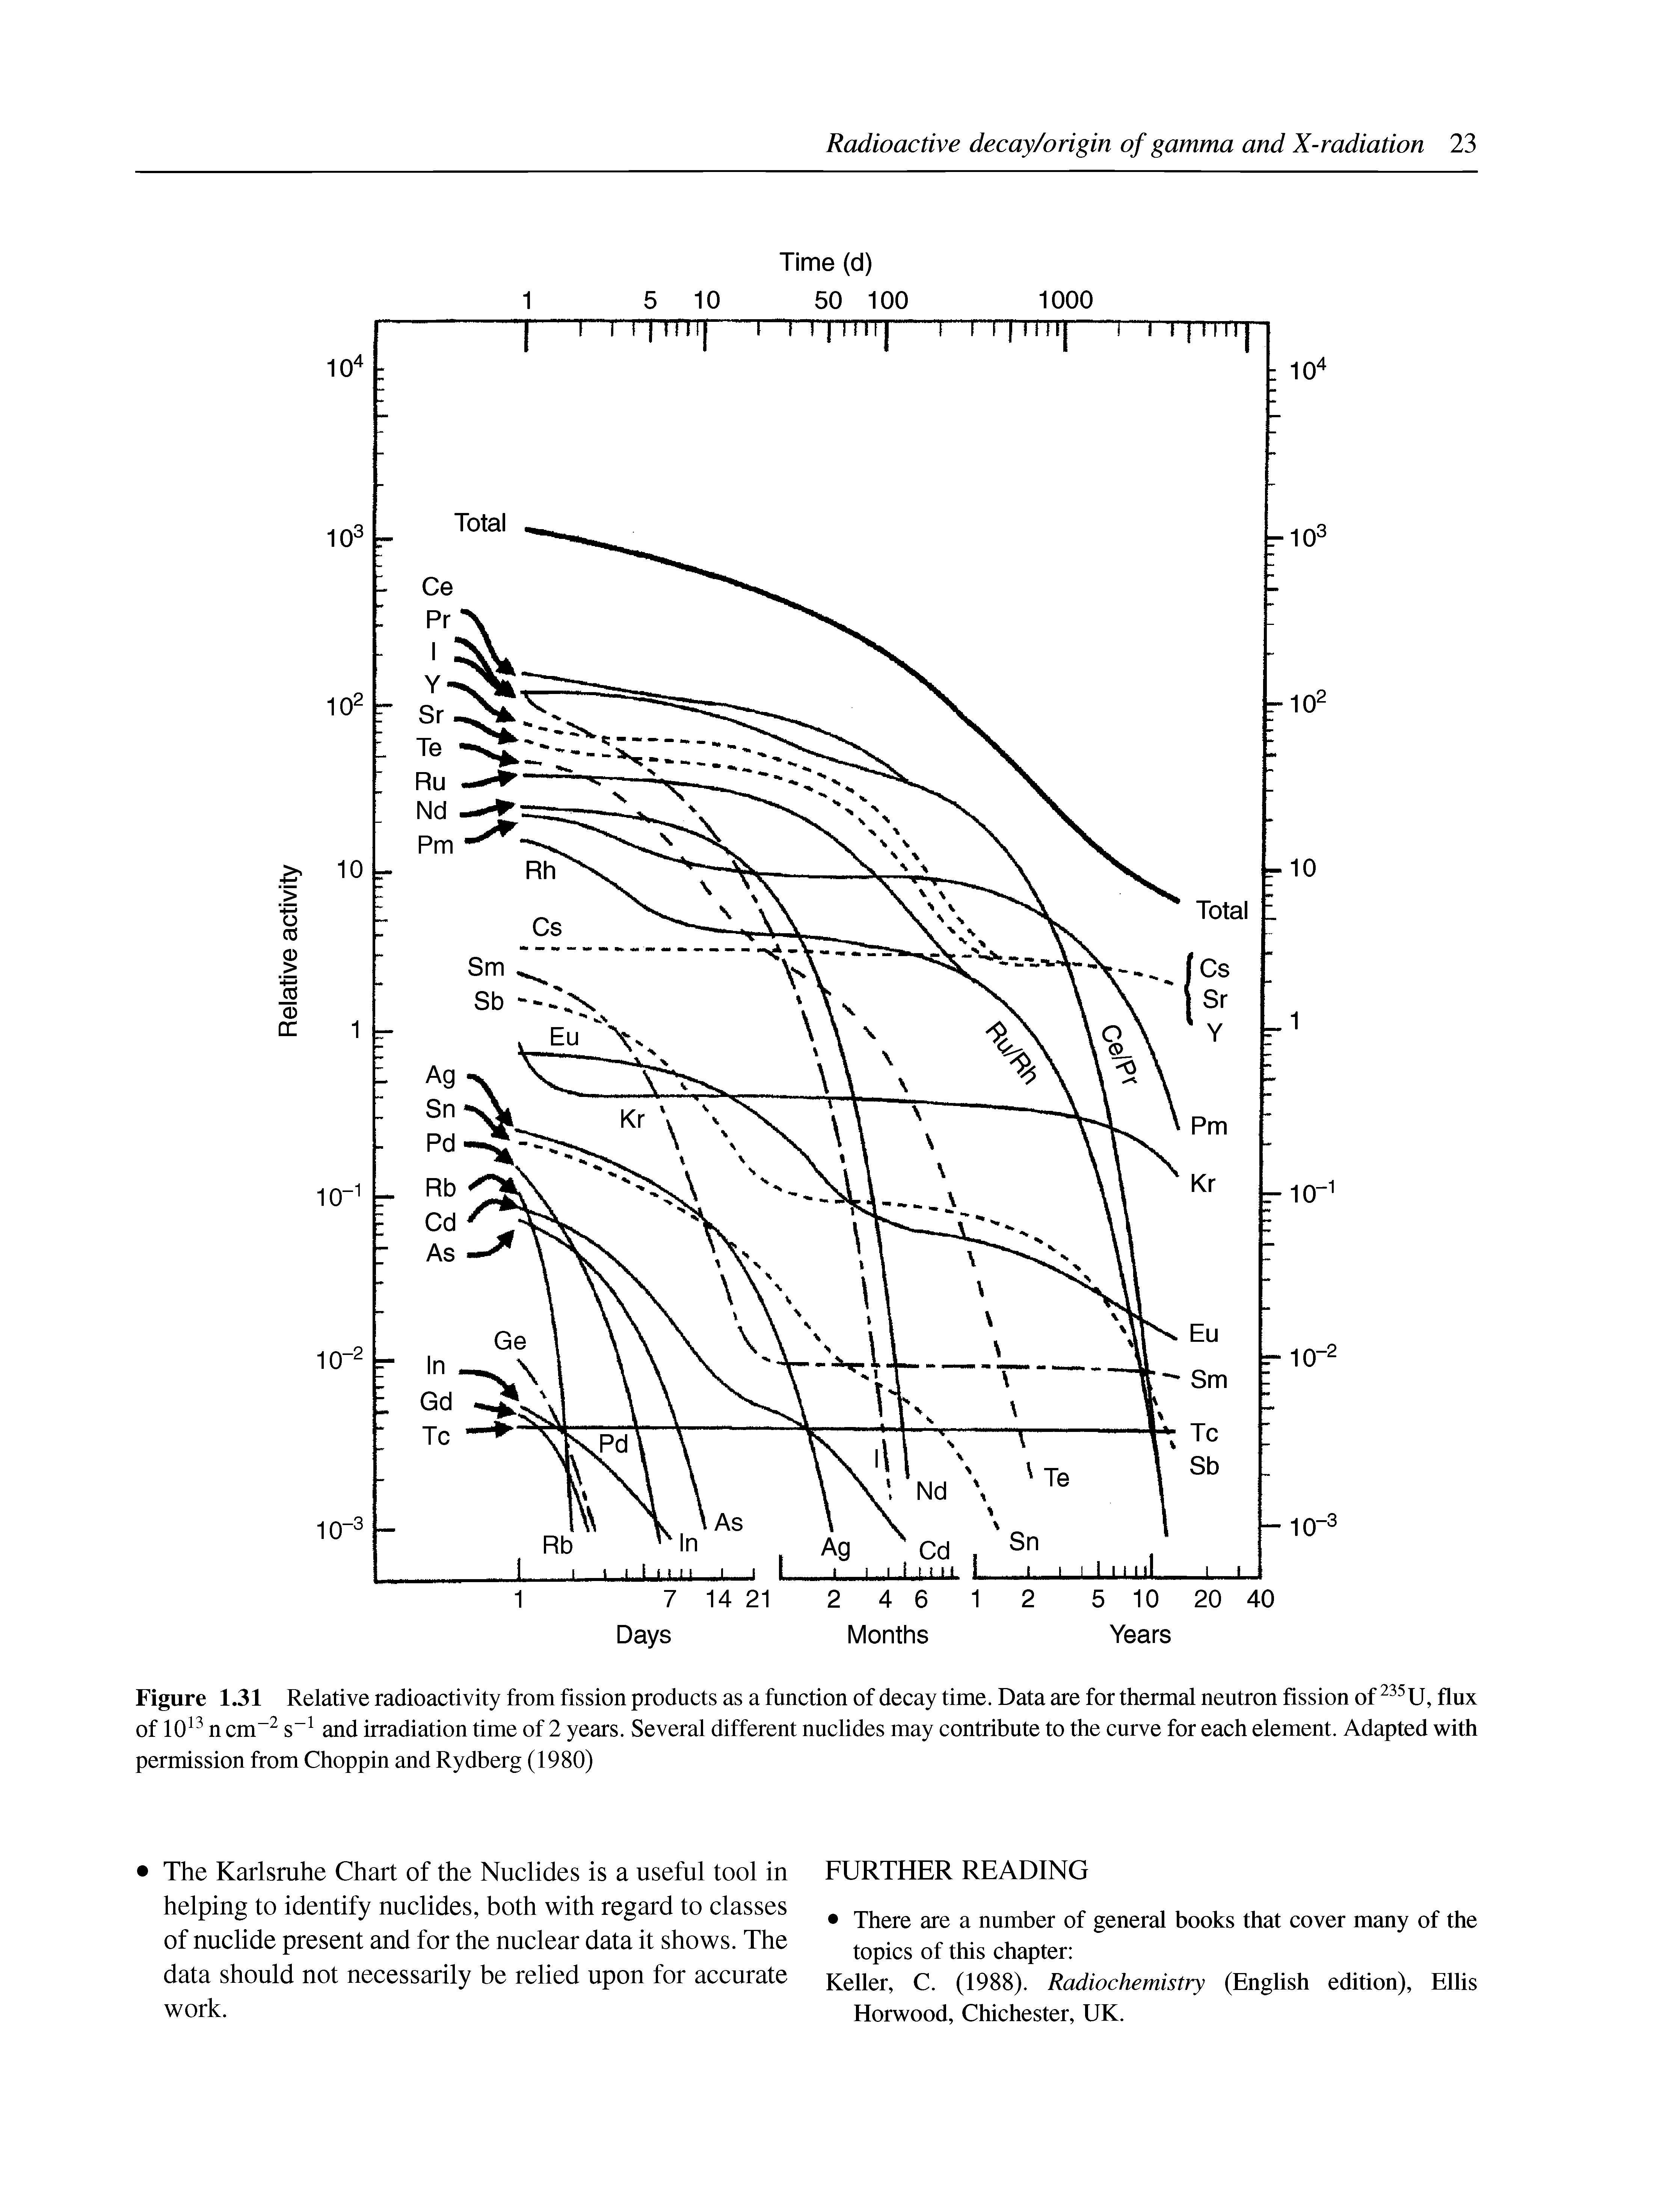 Figure 1.31 Relative radioactivity from fission products as a function of decay time. Data are for thermal neutron fission of flux of 10 n cm s and irradiation time of 2 years. Several different nuclides may contribute to the curve for each element. Adapted with permission from Choppin and Rydberg (1980)...